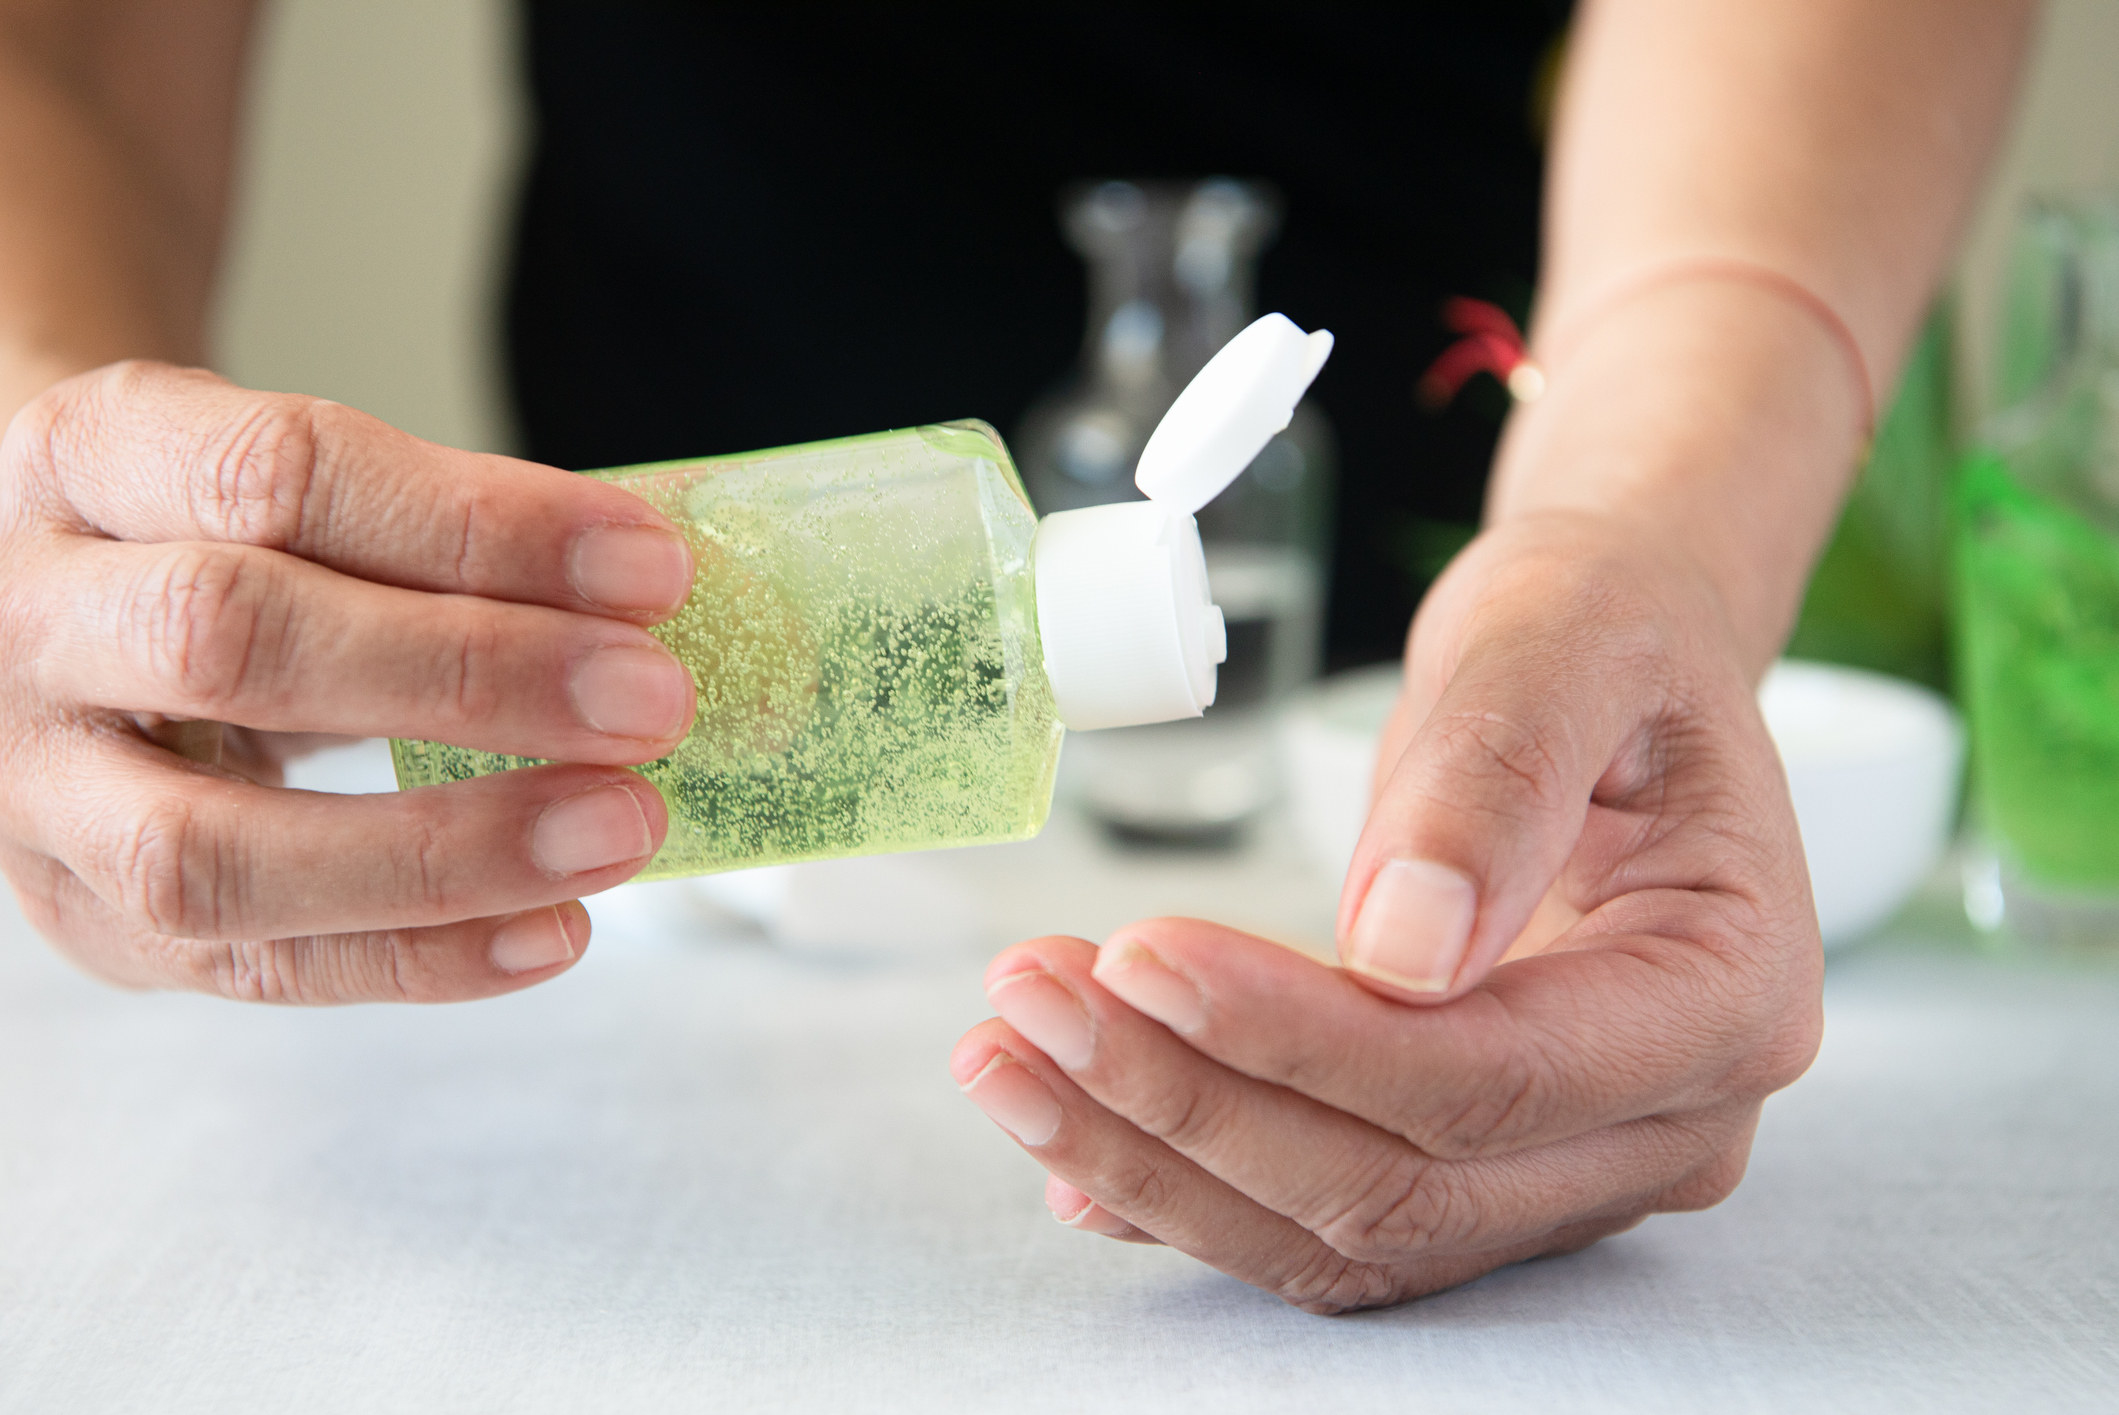 A person pours aloe vera on their hand